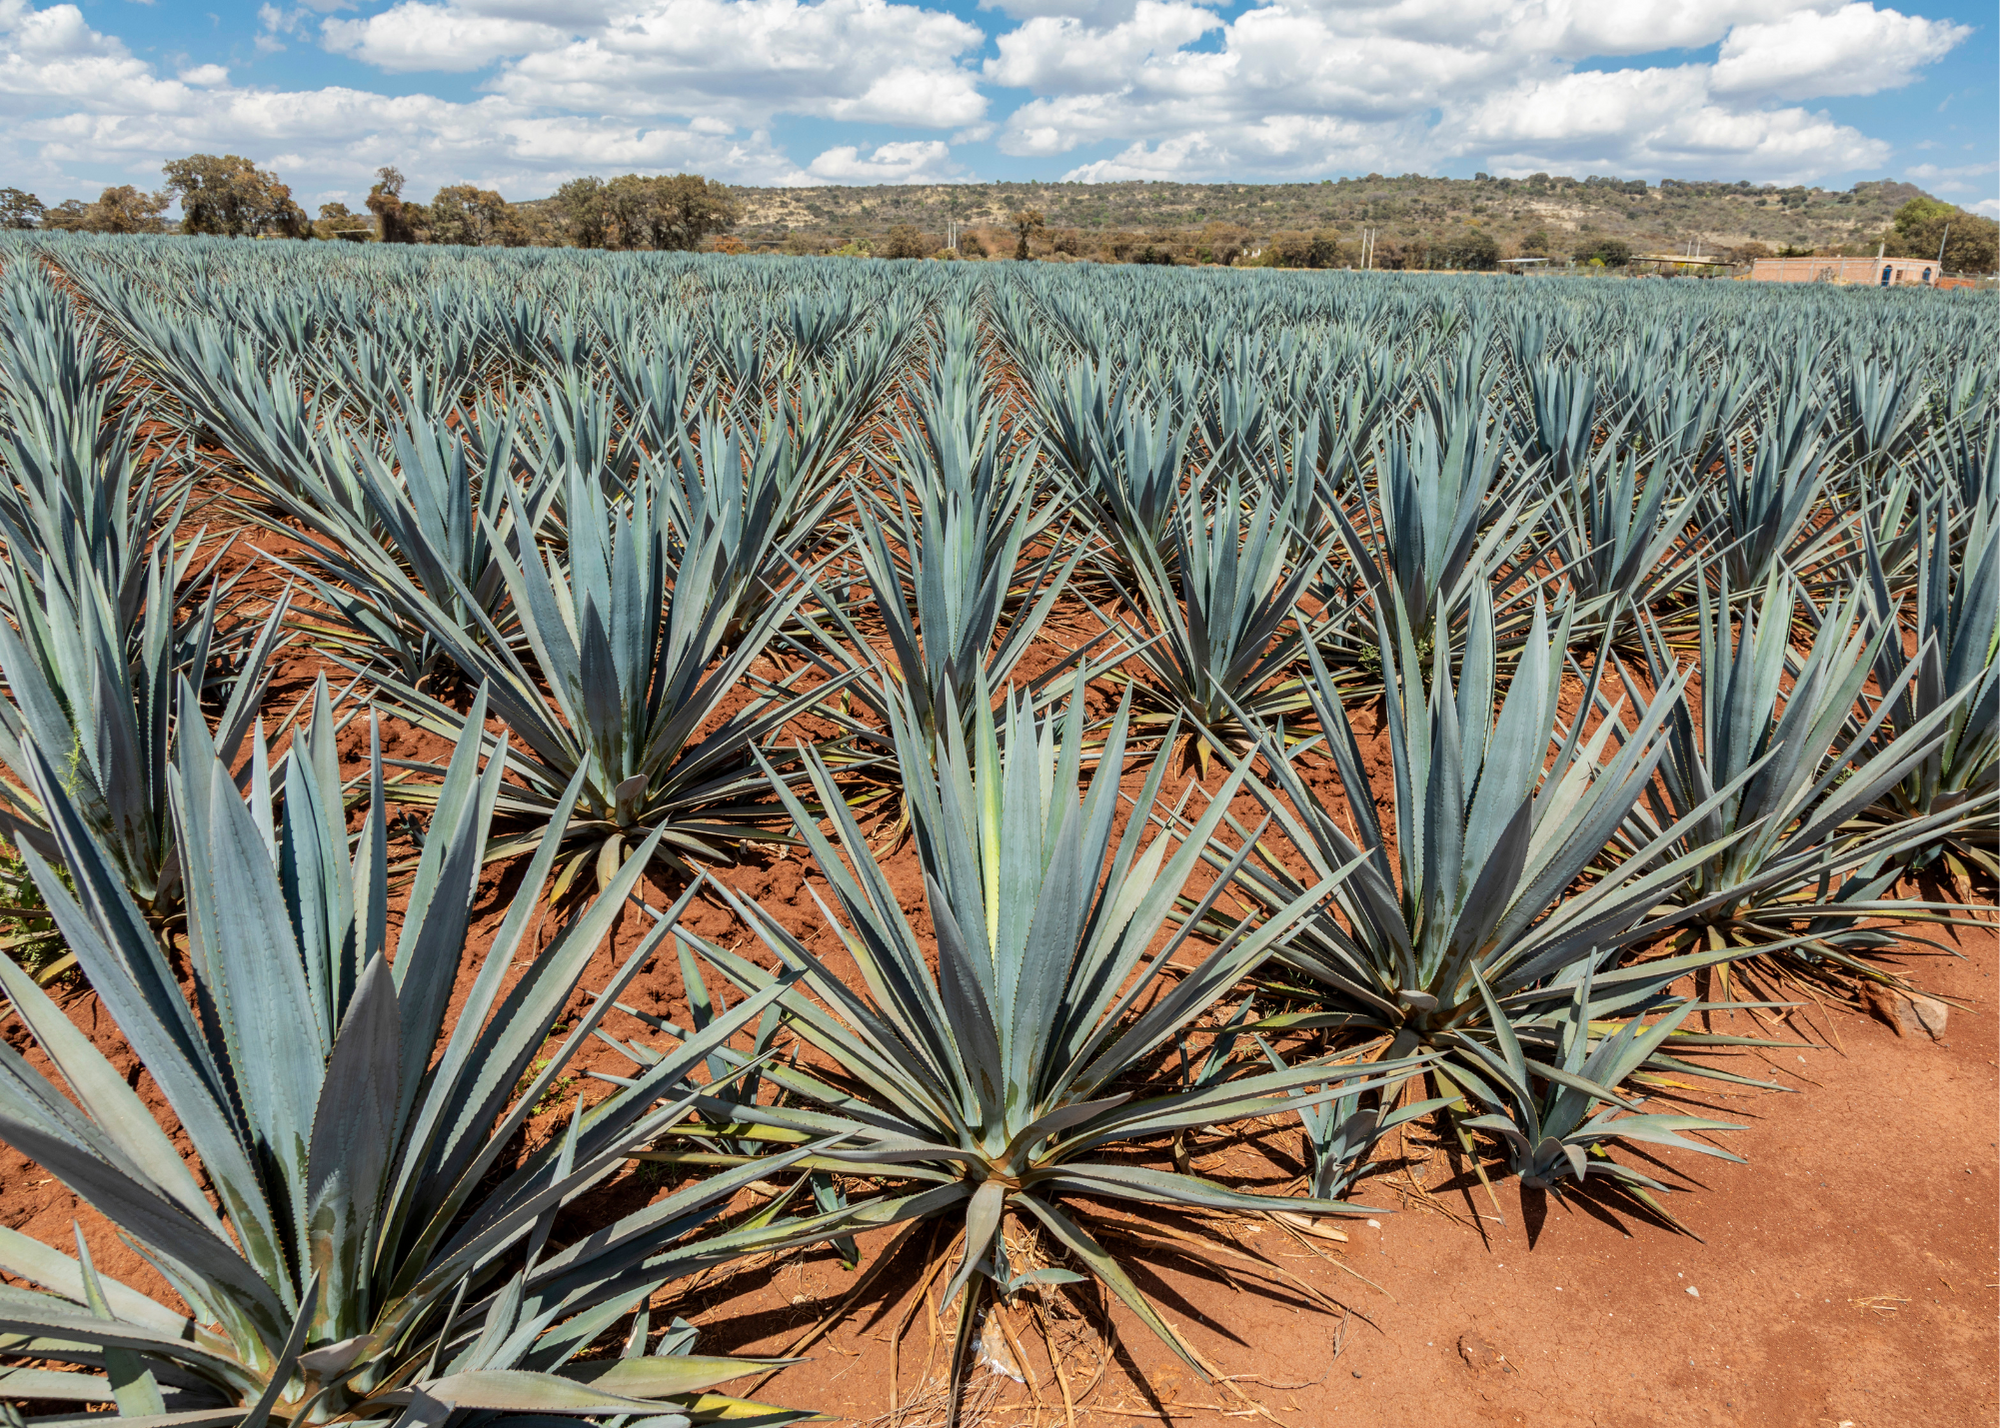 A huge farm field in Mexico is covered with rows of blue agave plants